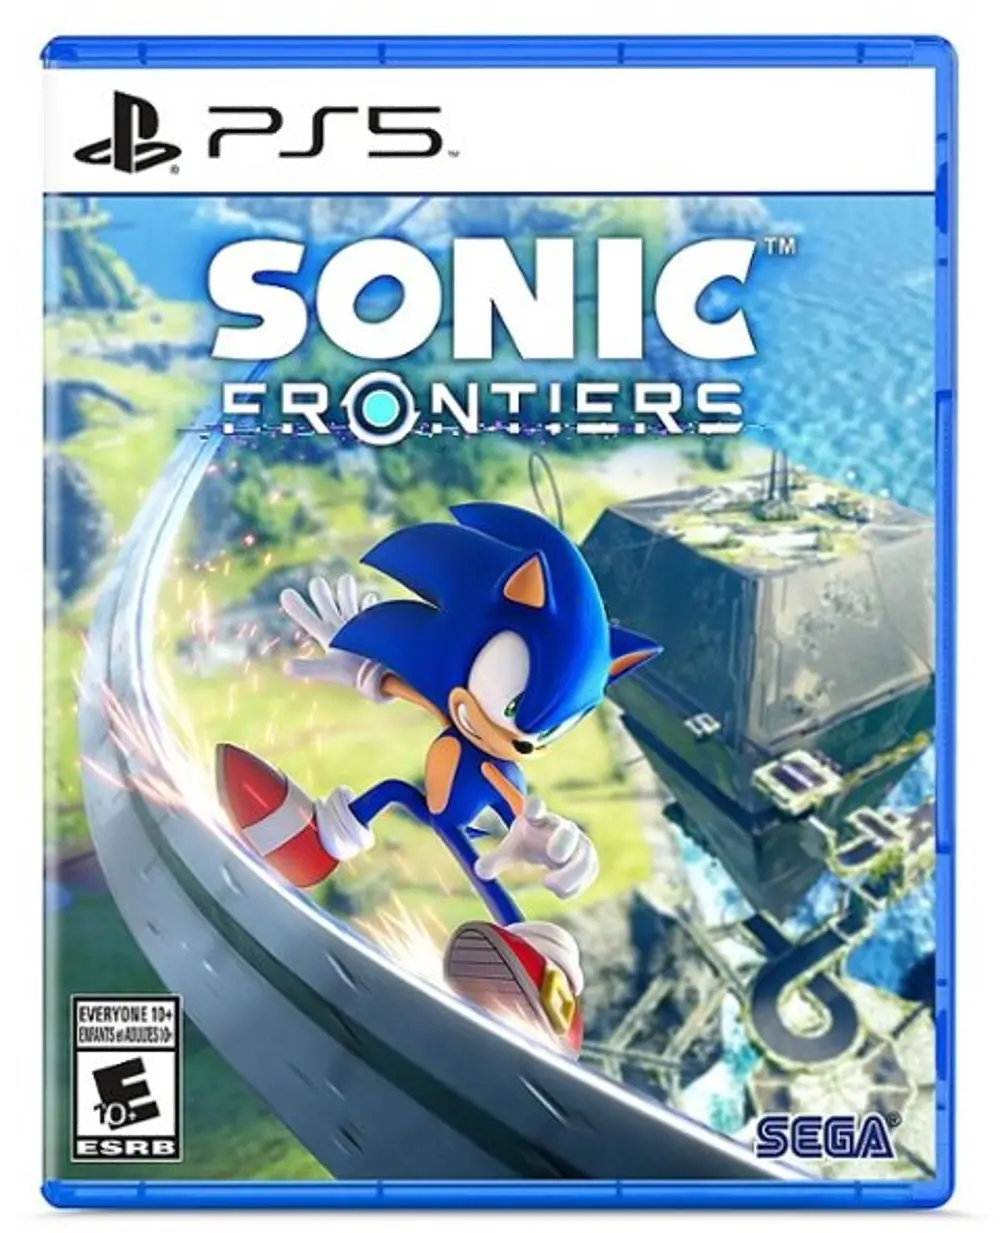 PS5/SONIC_FRONTIERS Sonic Frontiers - PS5-1